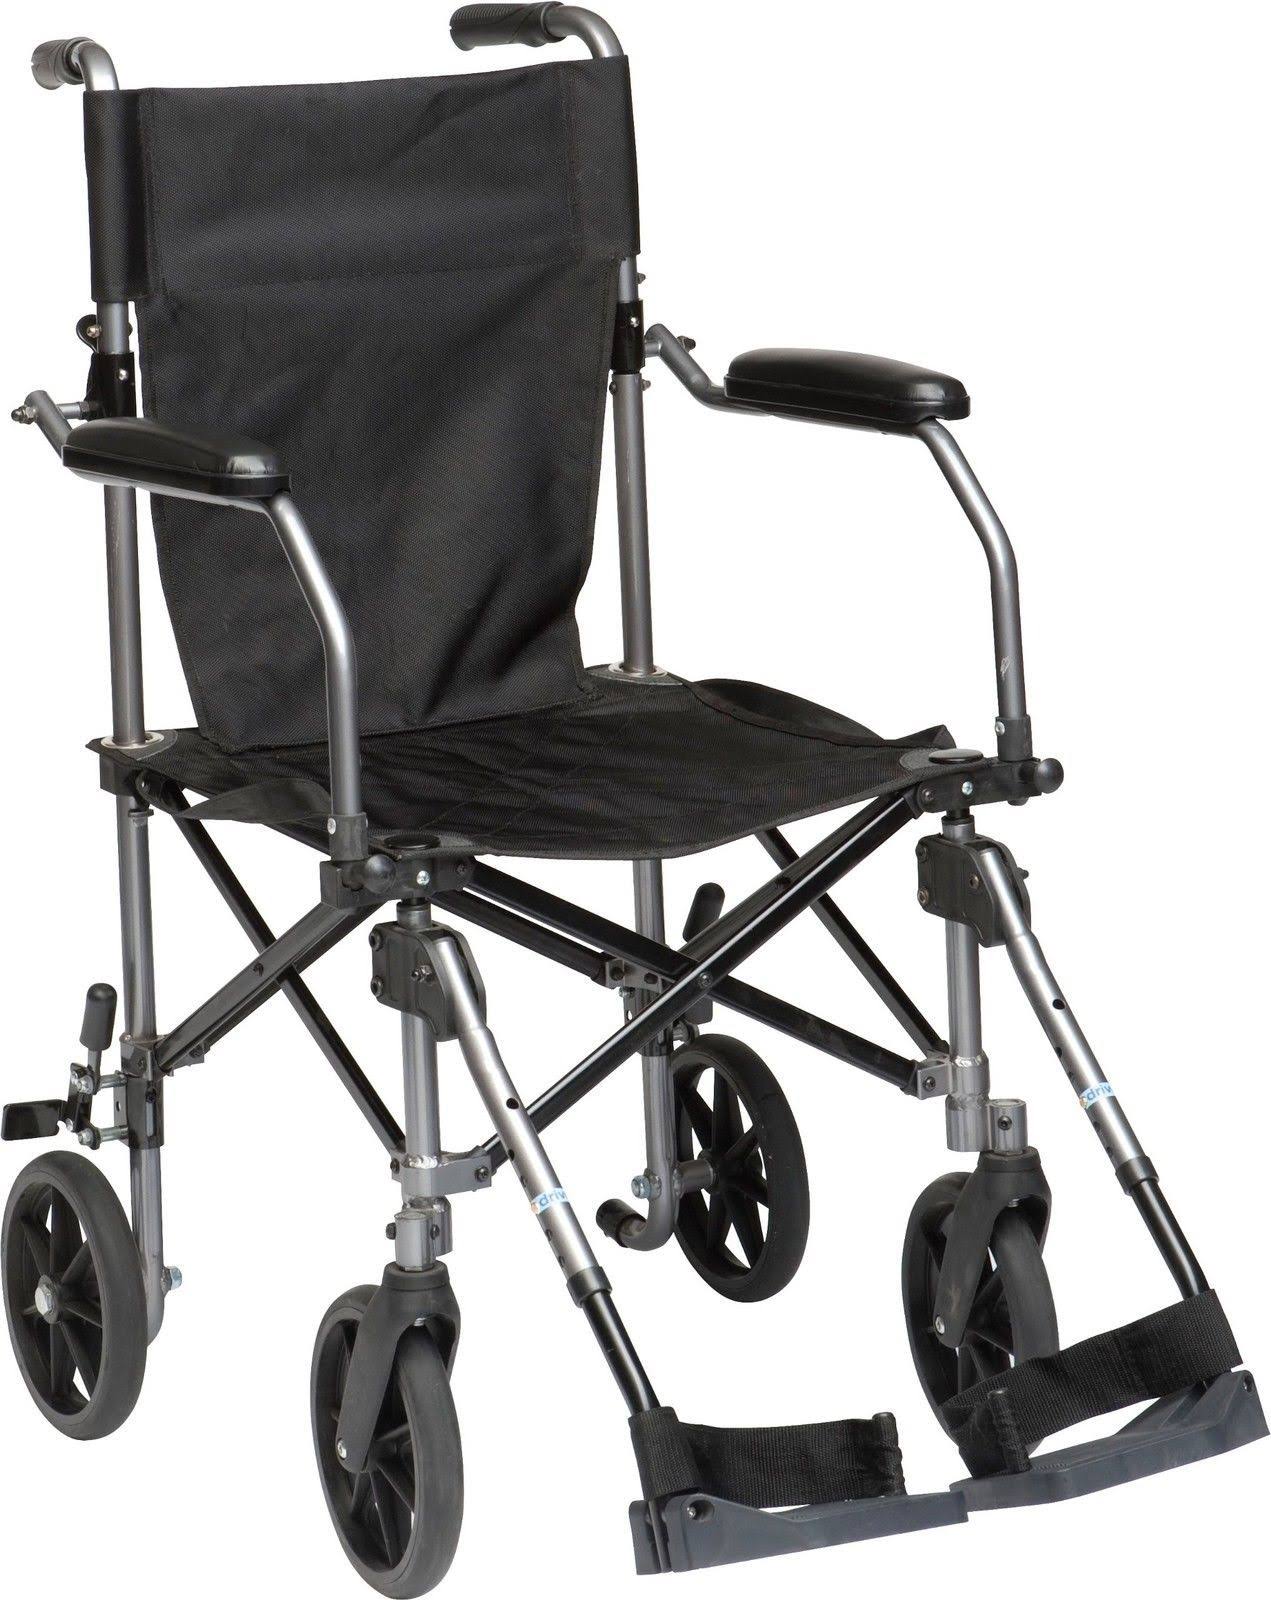 Drive Medical Travelite Transport Wheelchair Chair in a Bag, Black